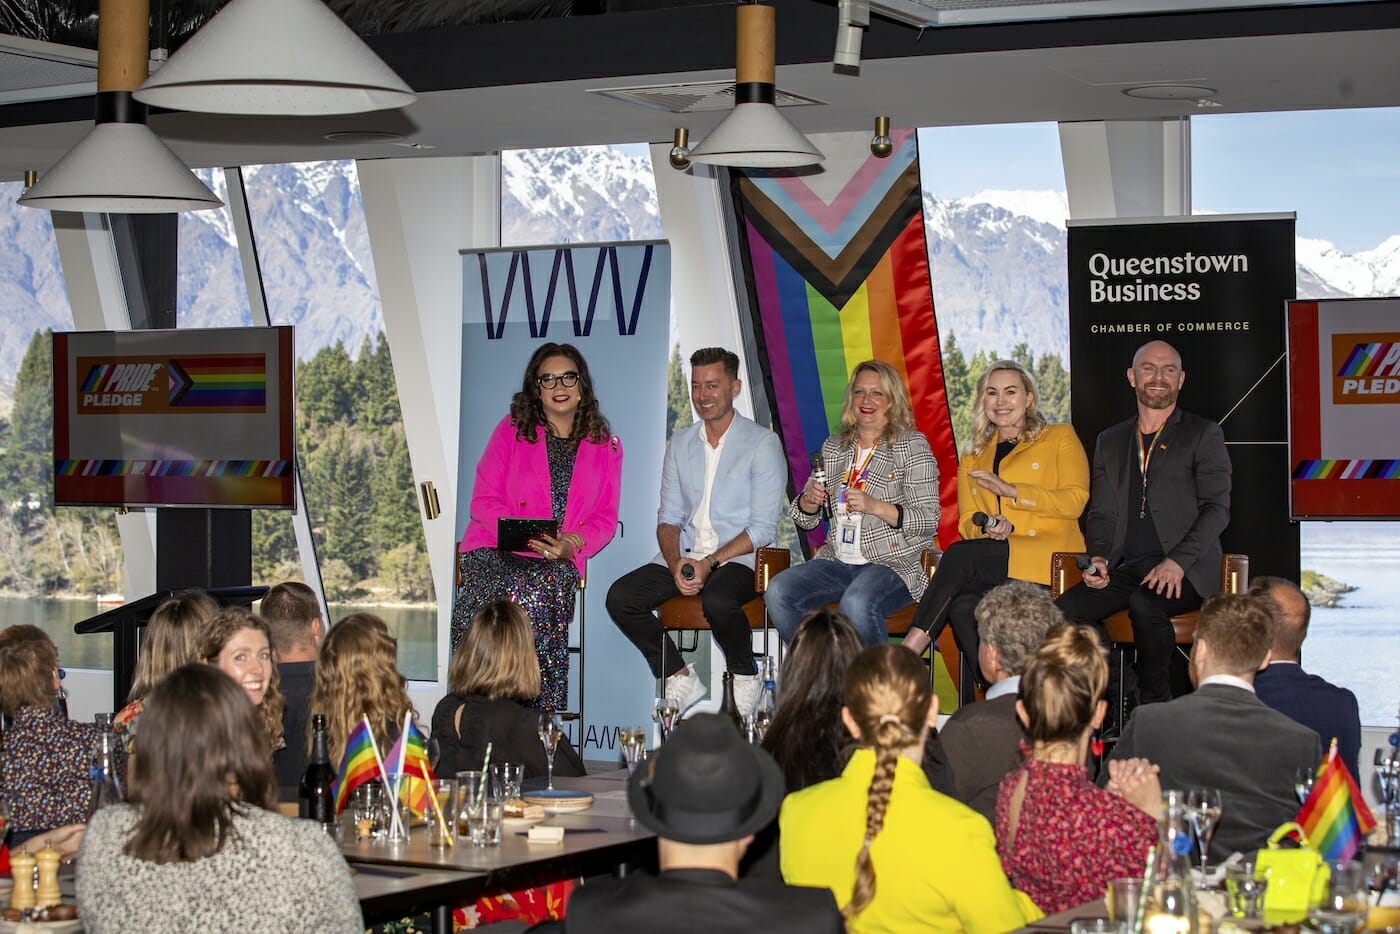 Lizzi Whaley, the CEO Spaceworks in the panel of discussion during winter pride